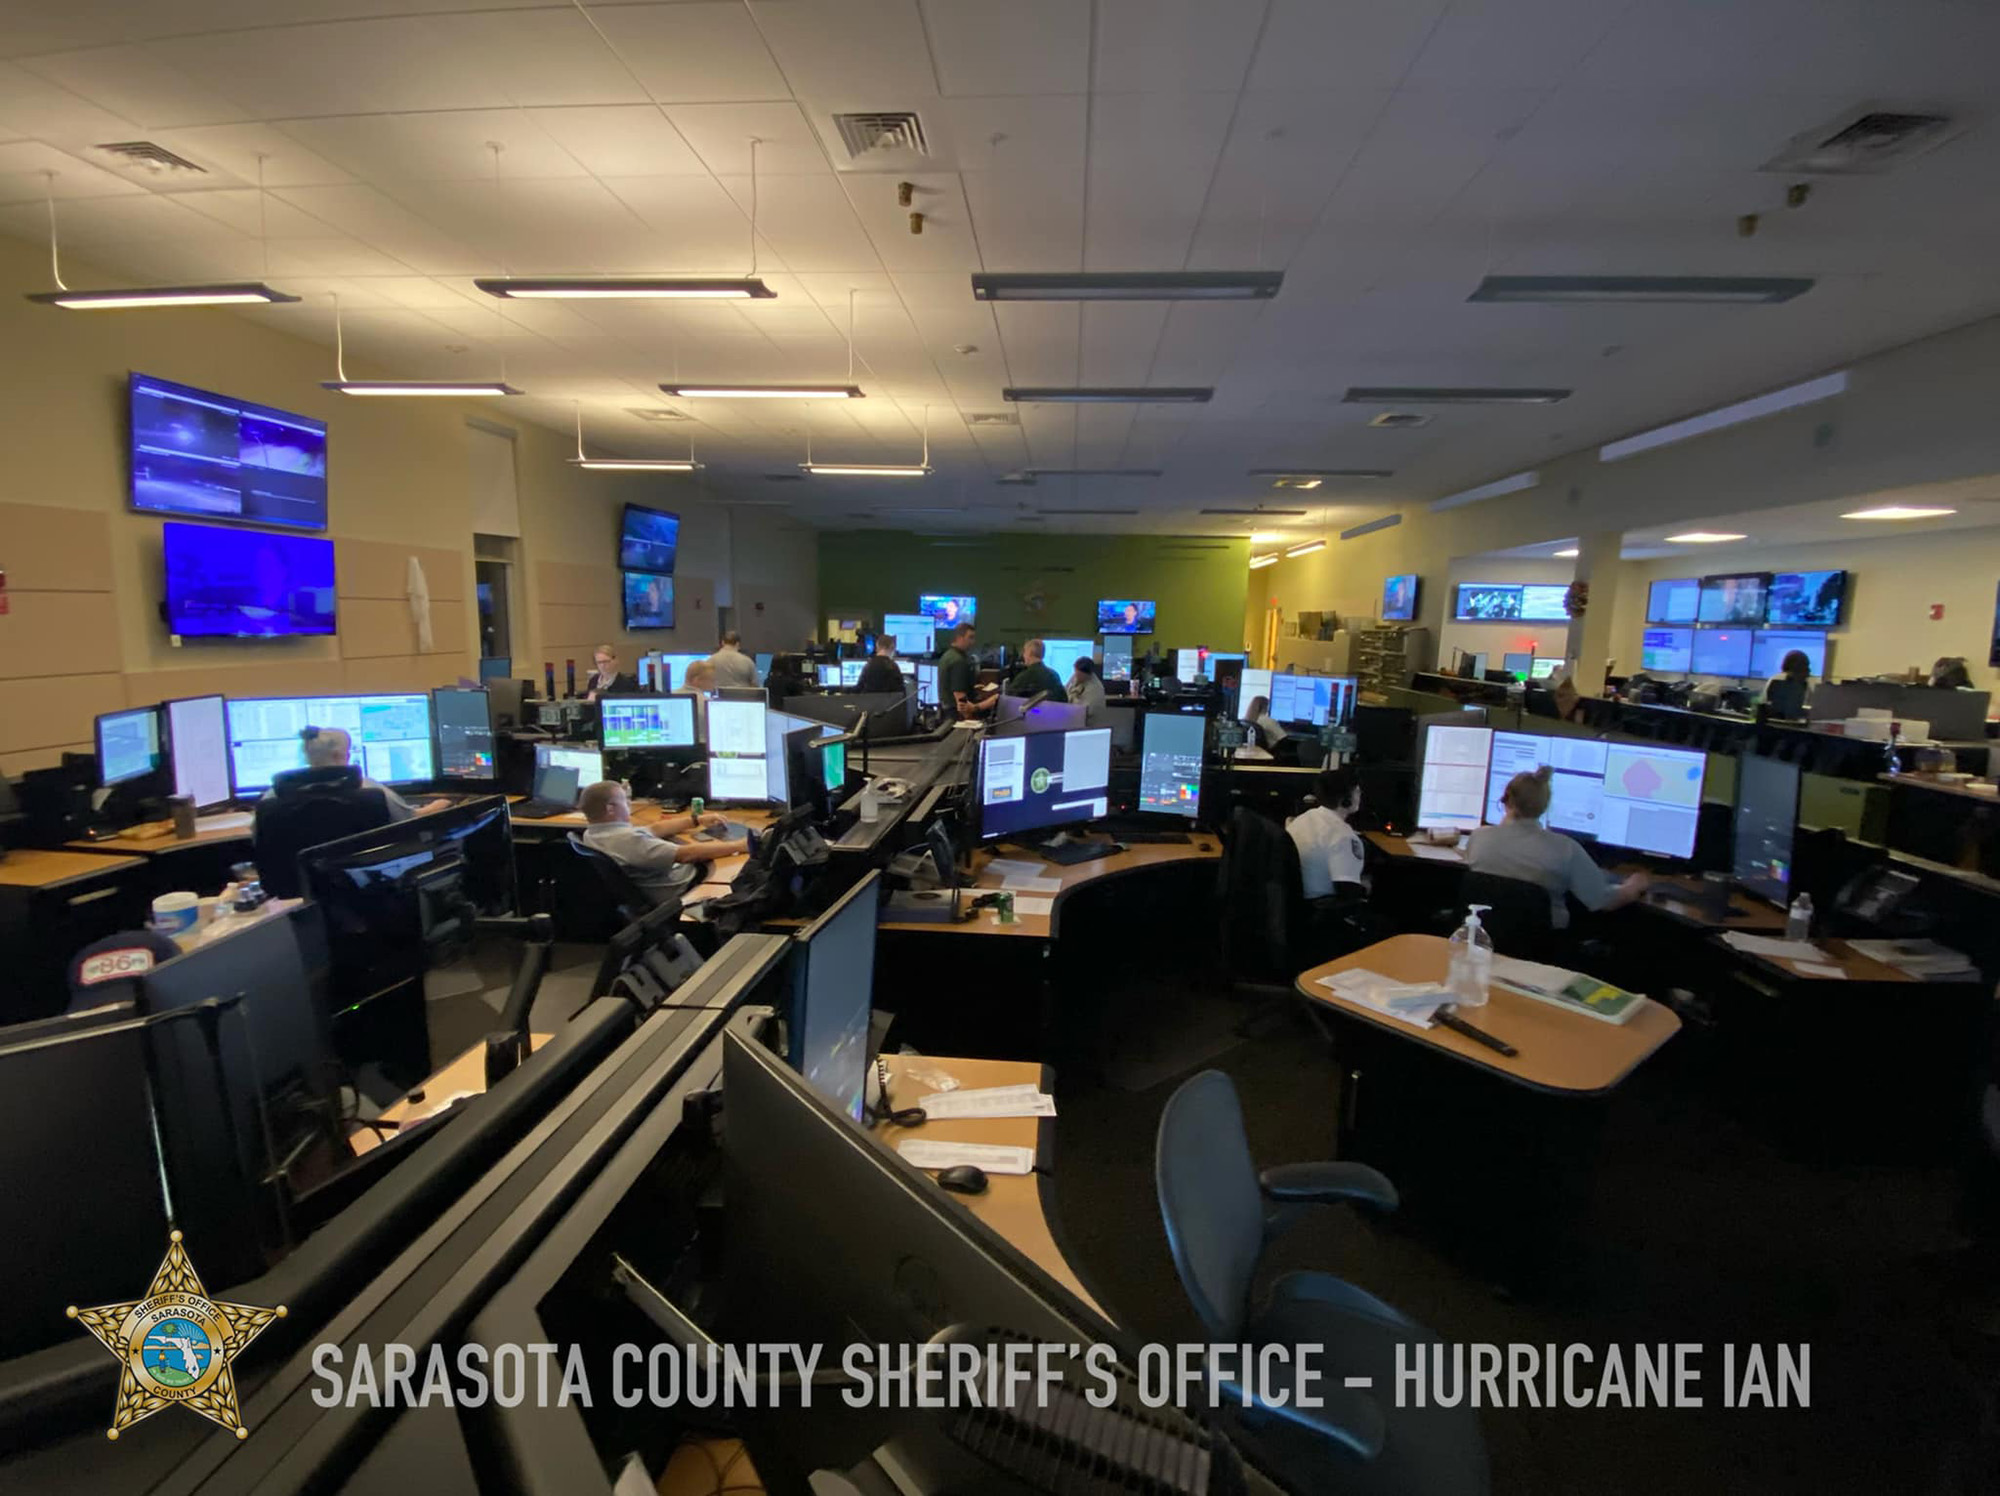 Sarasota County Sheriff's Office have been inundated with emergency calls.